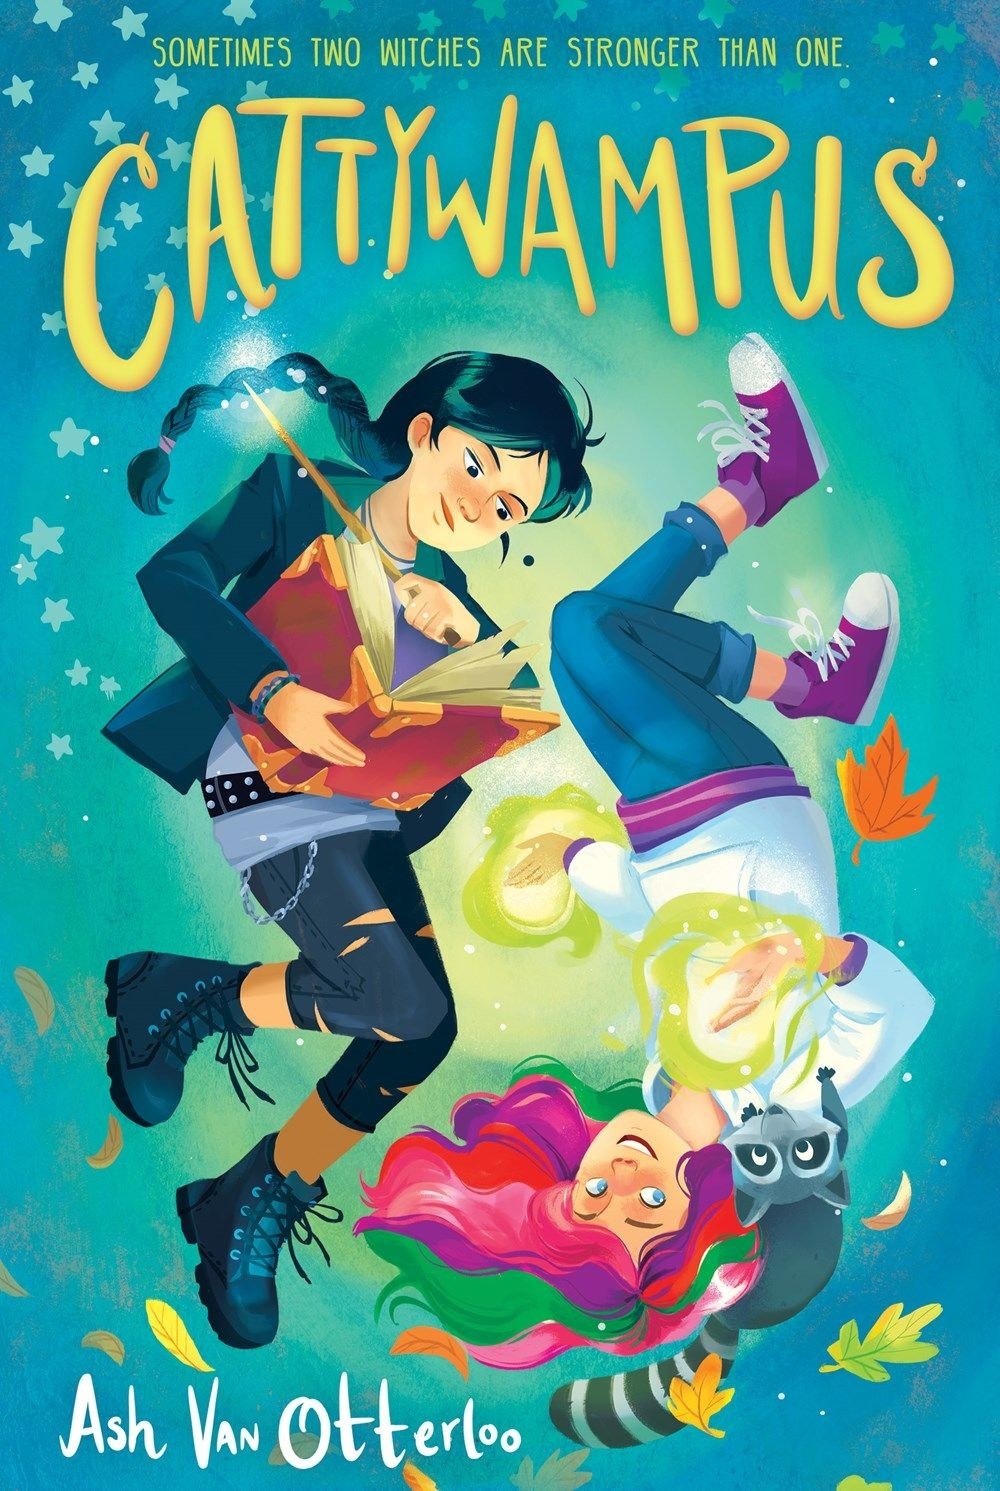 Two white girls are on the blue cover. One holds a book and a wand, the other is upside down and has glowing hands and a raccoon on her shoulder. Title reads: &quot;Cattywampus&quot;